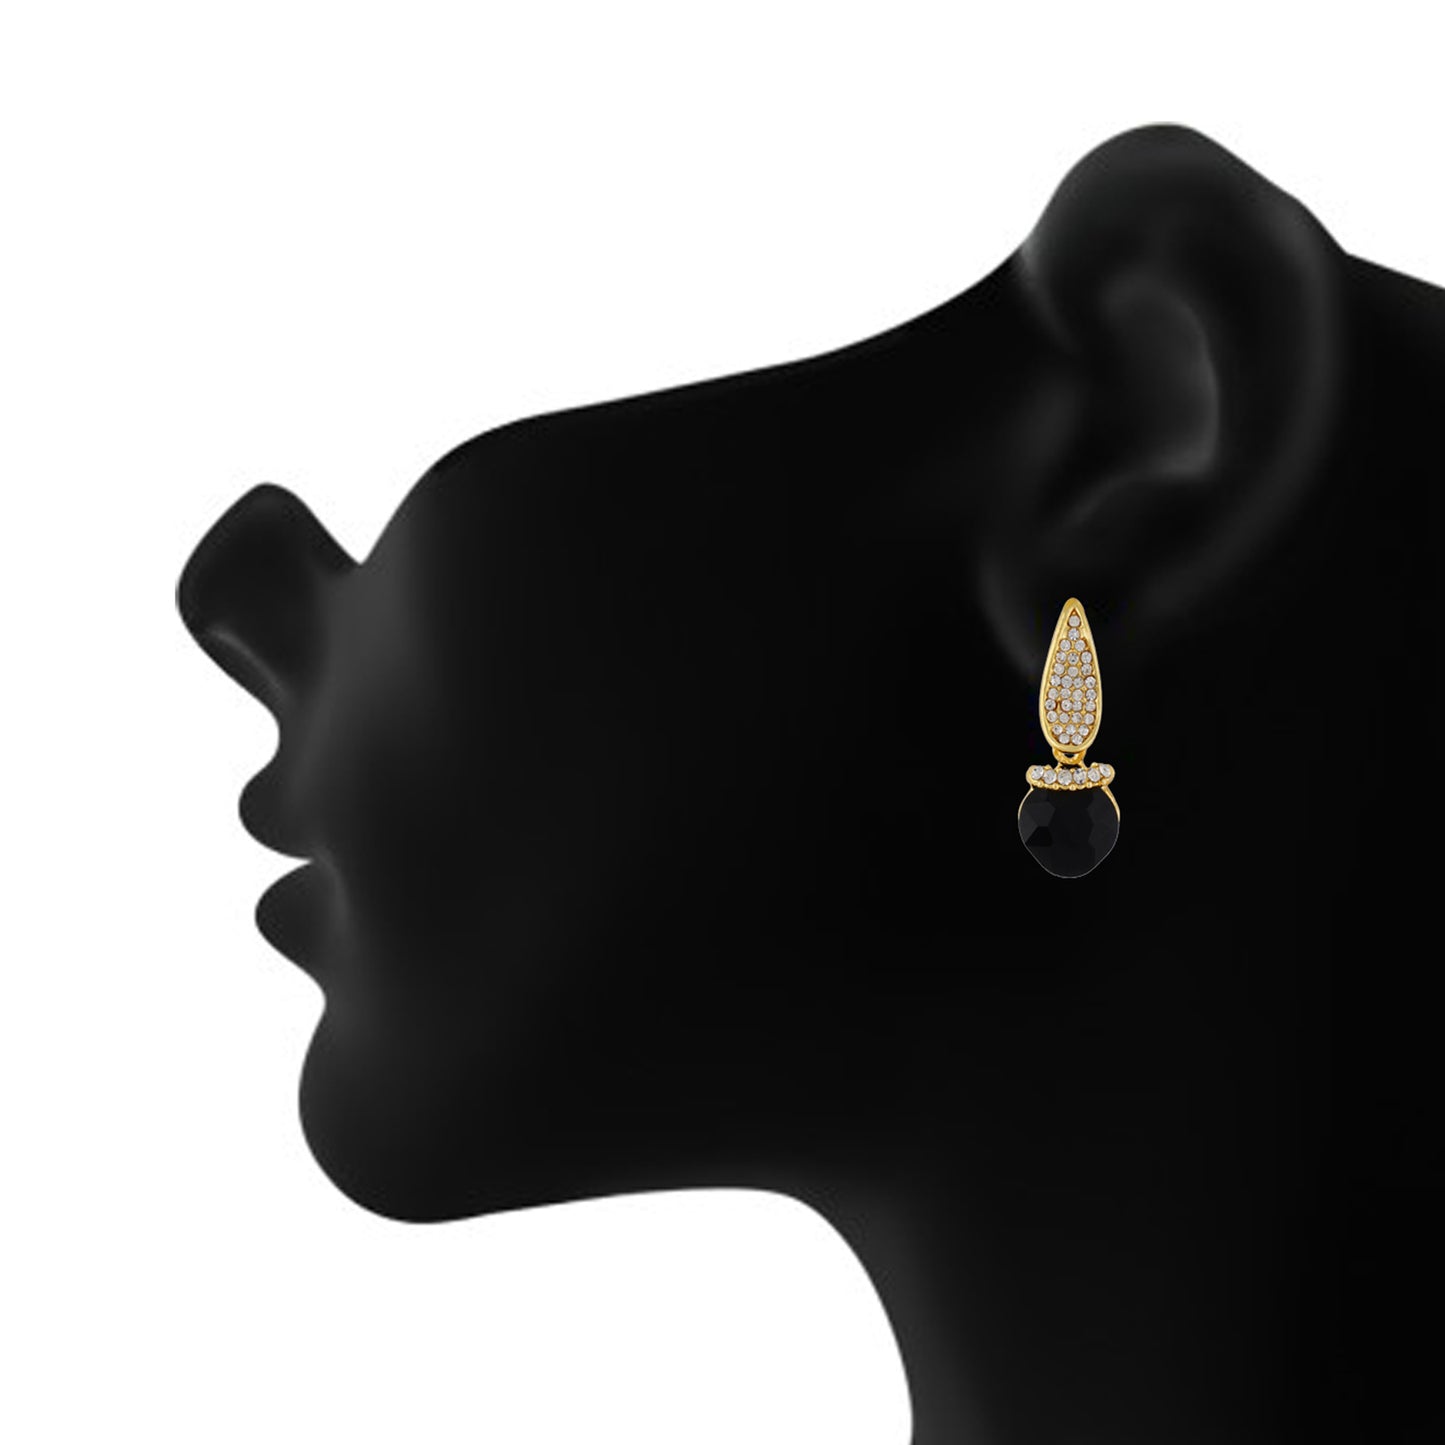 Beautiful Black and Gold Colour Drop Design Earring for Girls and Women